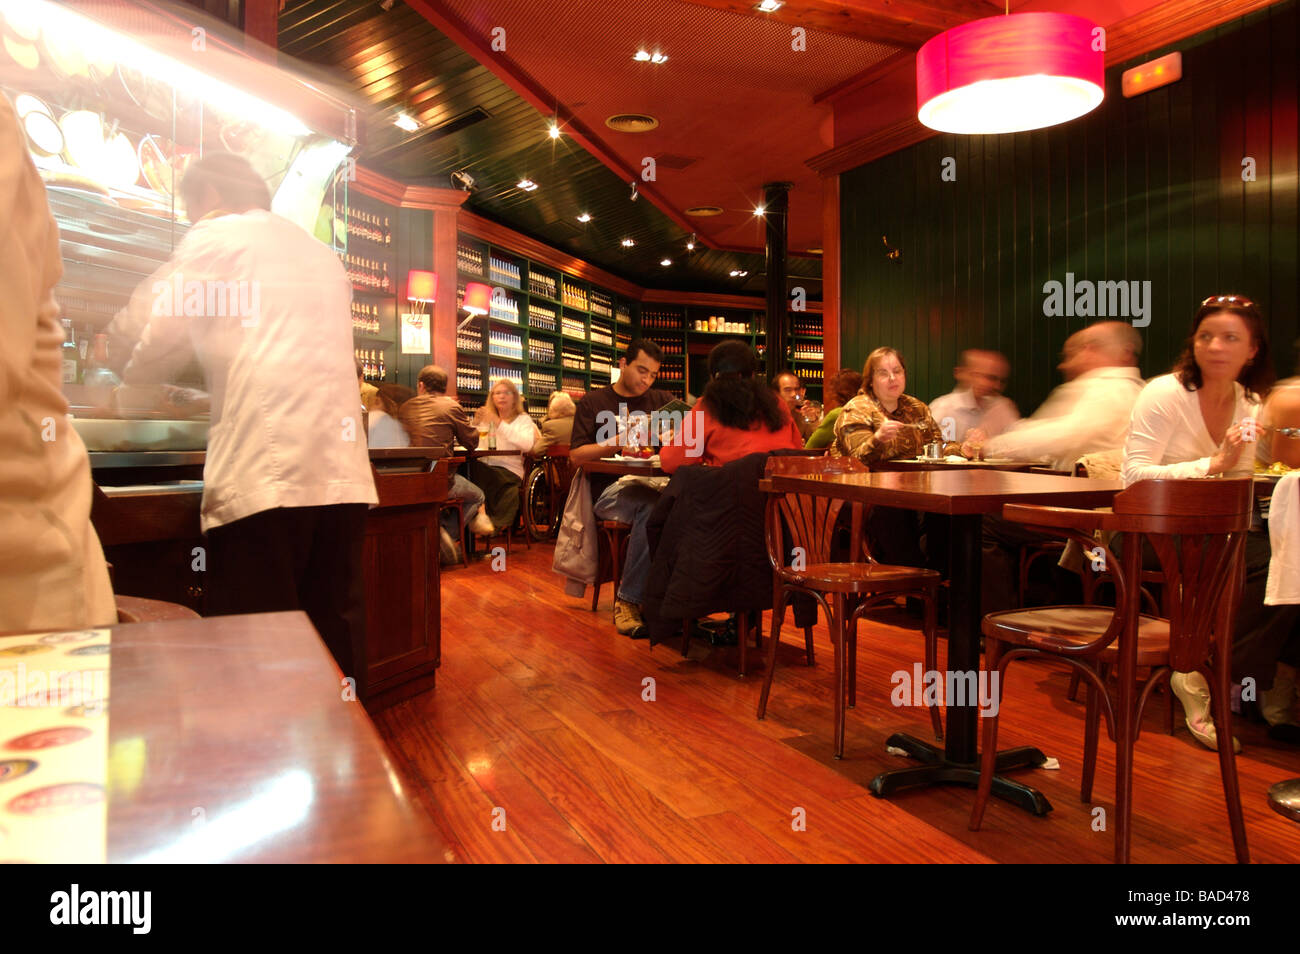 People eating in a Tapas Bar with busy waiters serving blurred Stock Photo